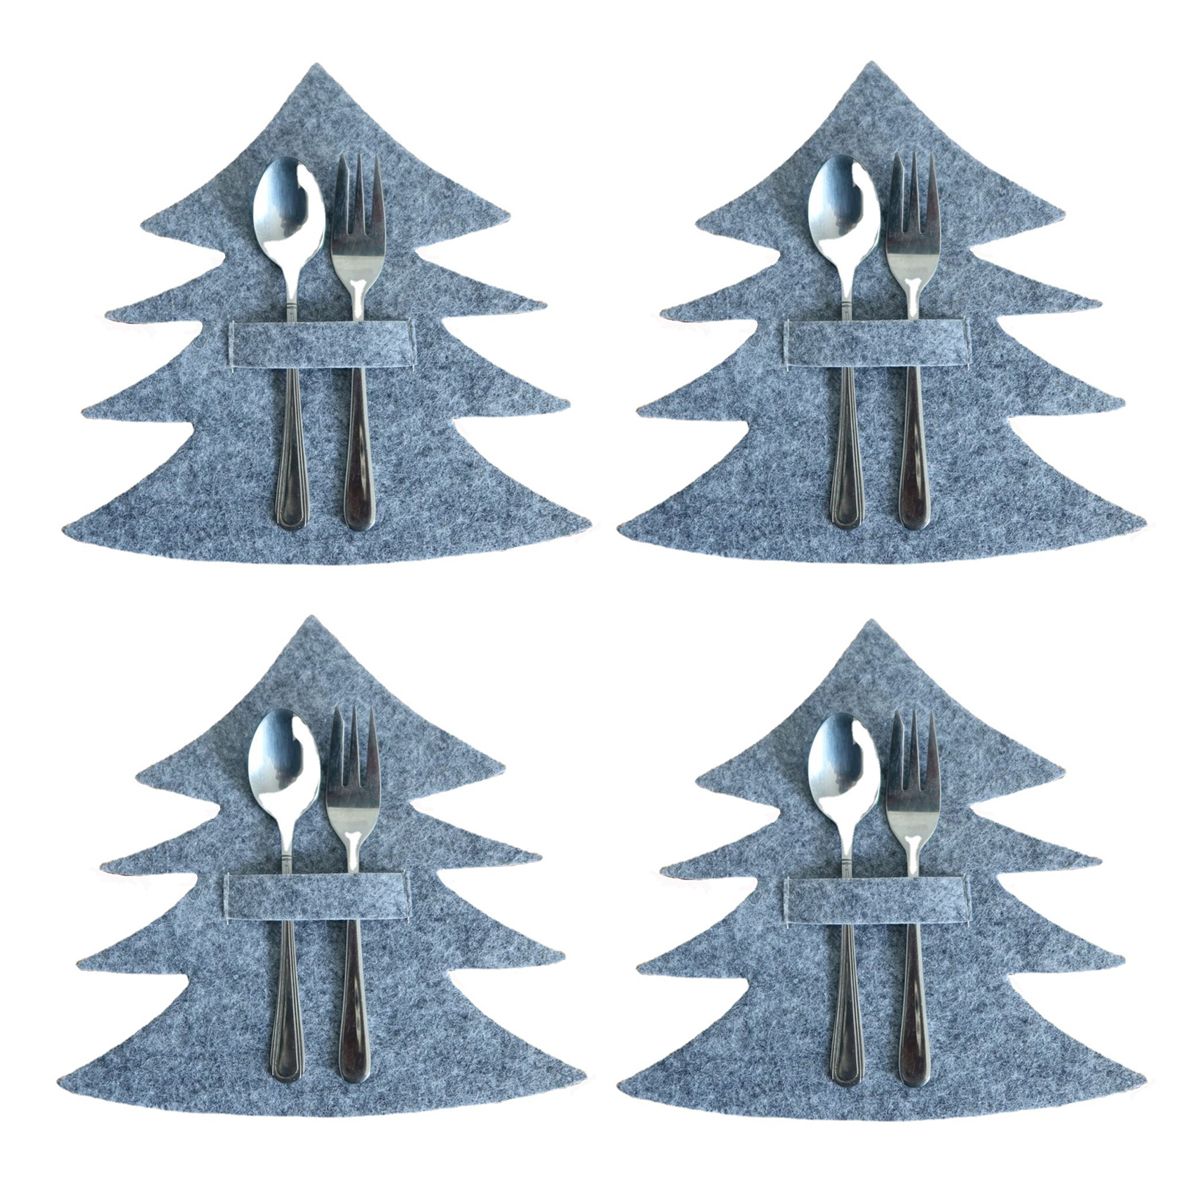 4PCS 44 Styles Christmas Knife and Fork Holder Elk Xmas Tree Pocket Cutlery Bag Non-woven fabric Cookware Organizer Table Decor